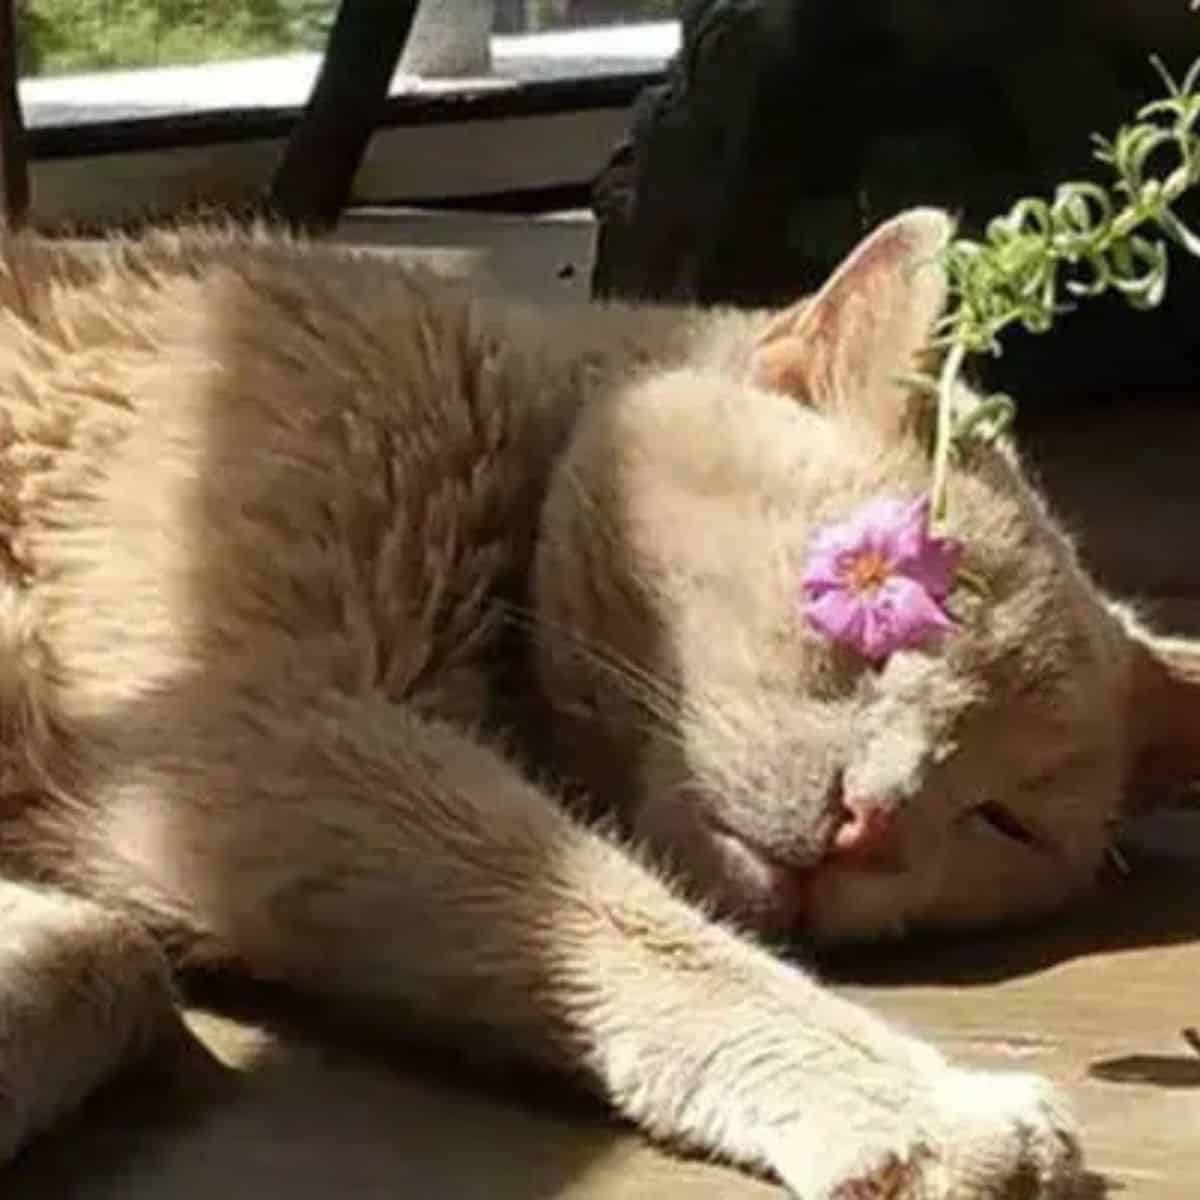 the rescued cat enjoys the sun